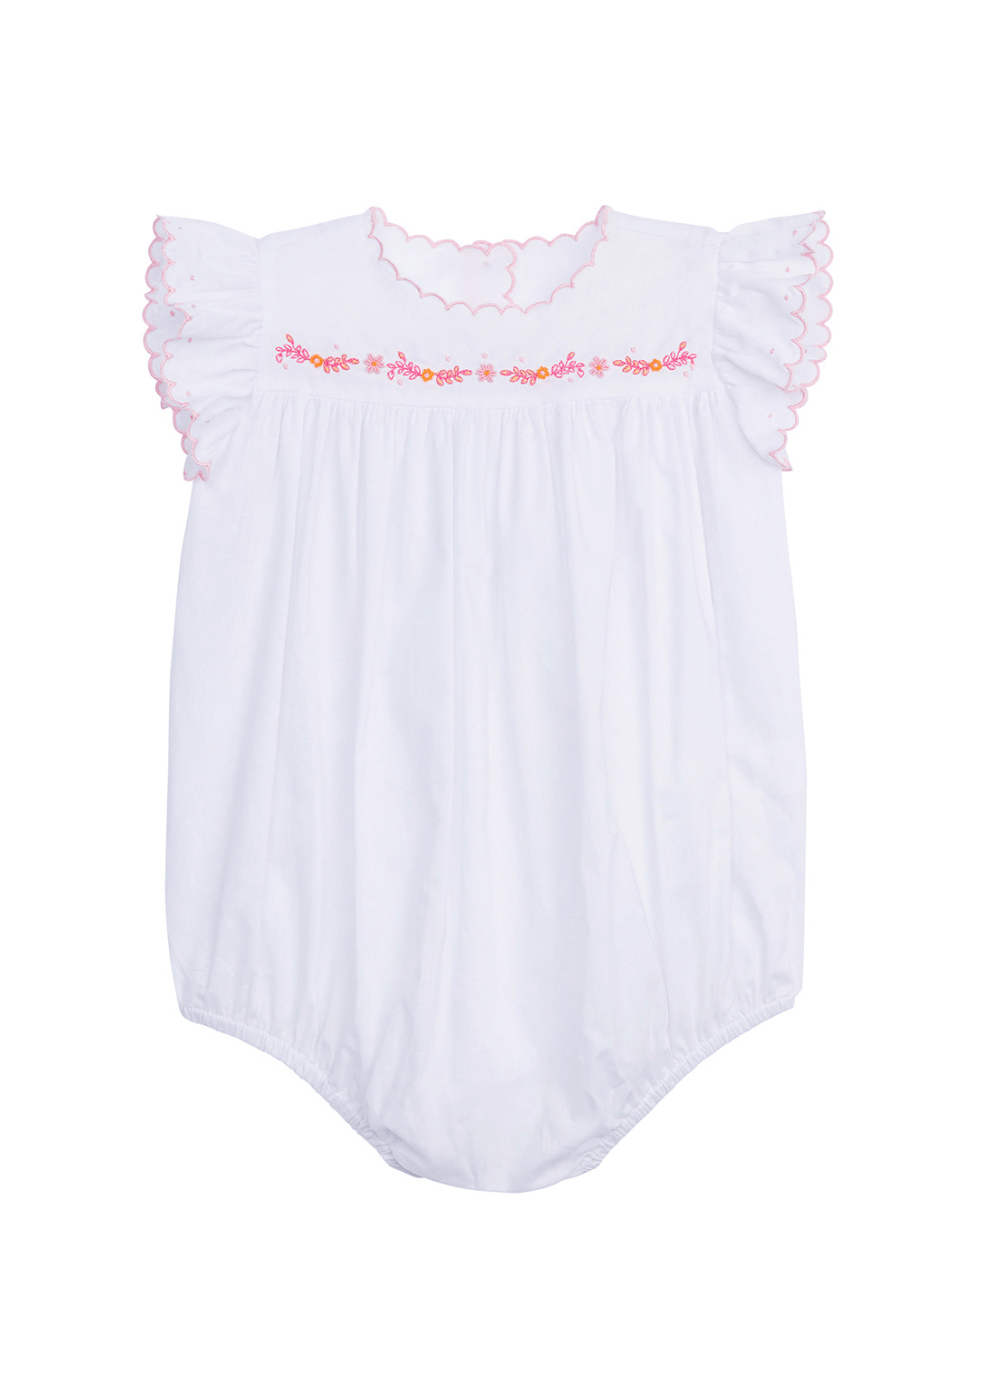 classic childrens clothing girls bubble with ruffle sleeves and pink and orange embroidery